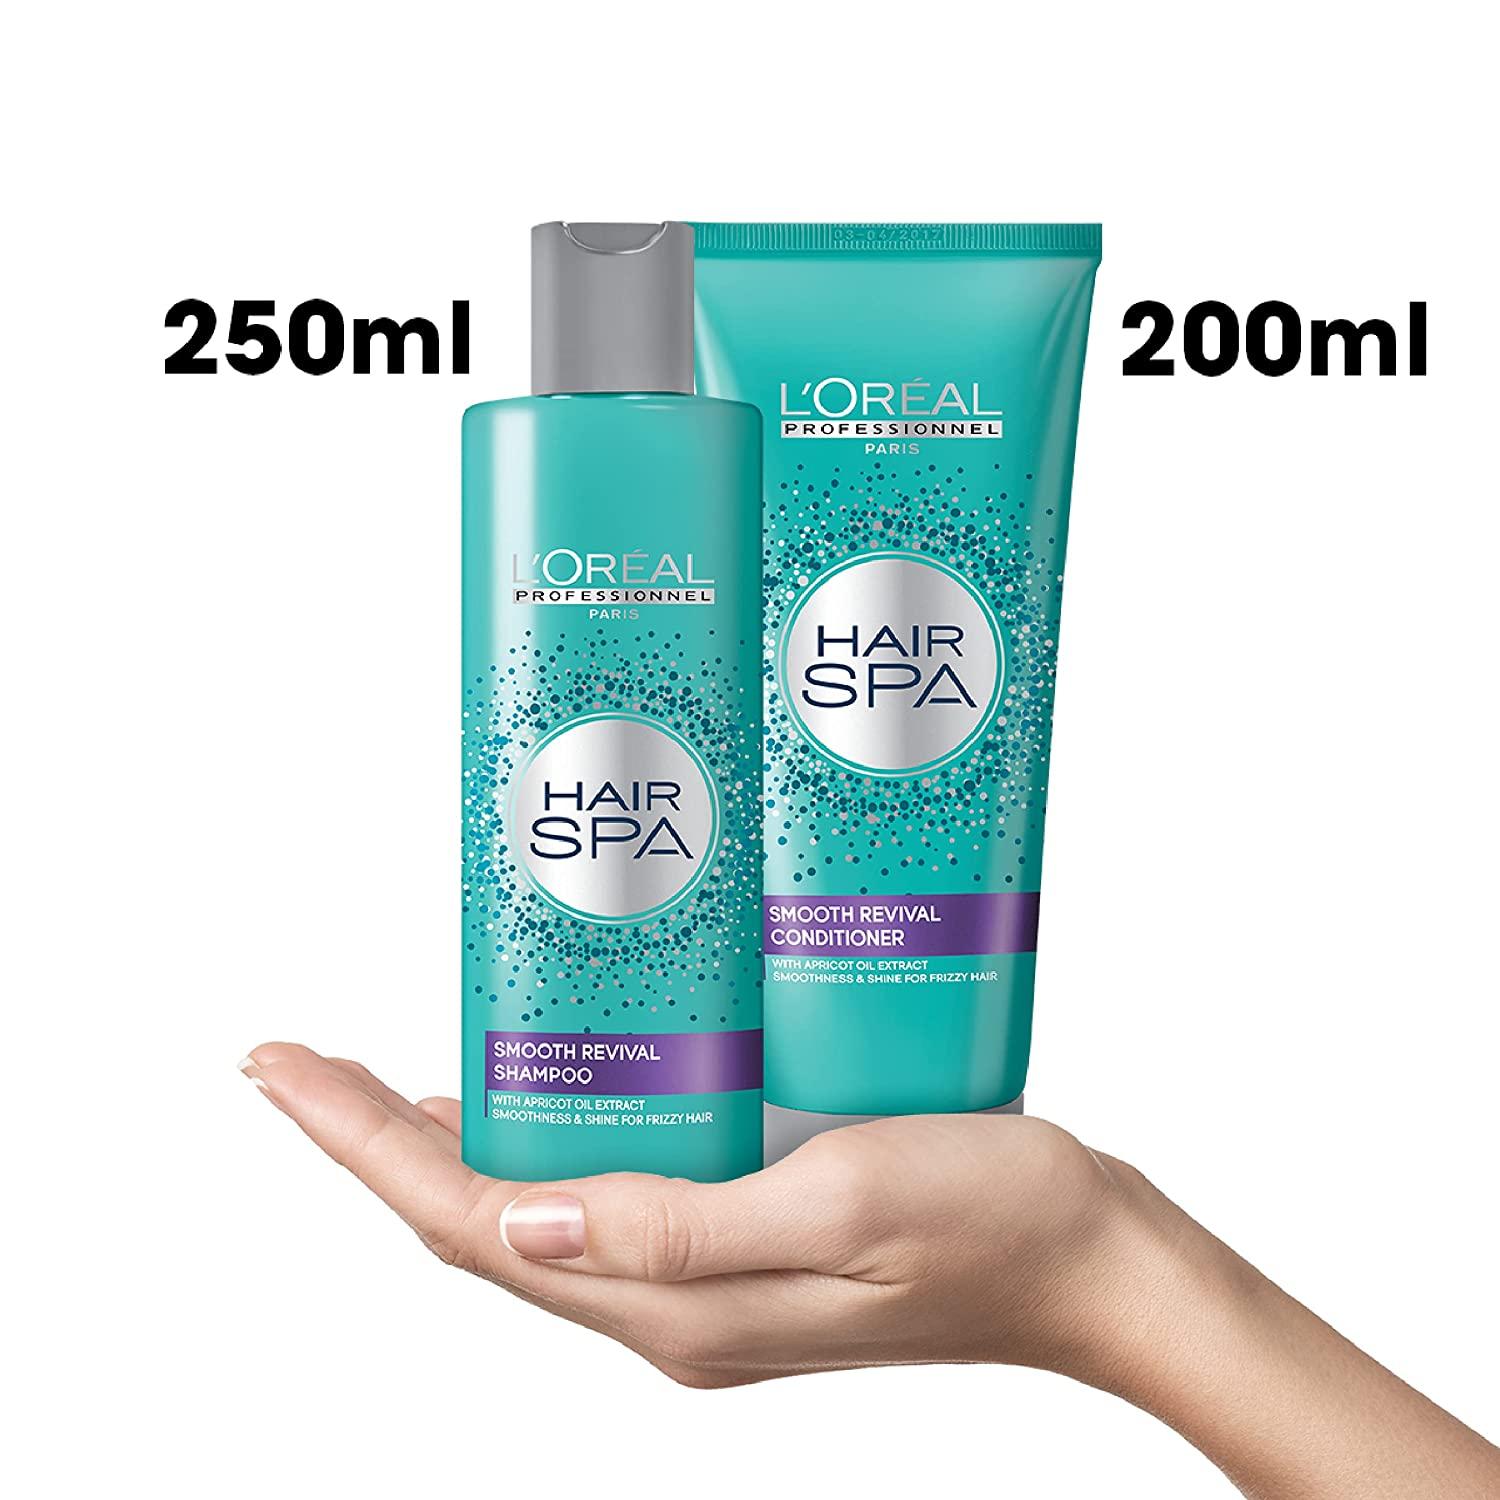 L'Oreal Professionnel Hair Spa Smooth Revival Shampoo, Conditioner